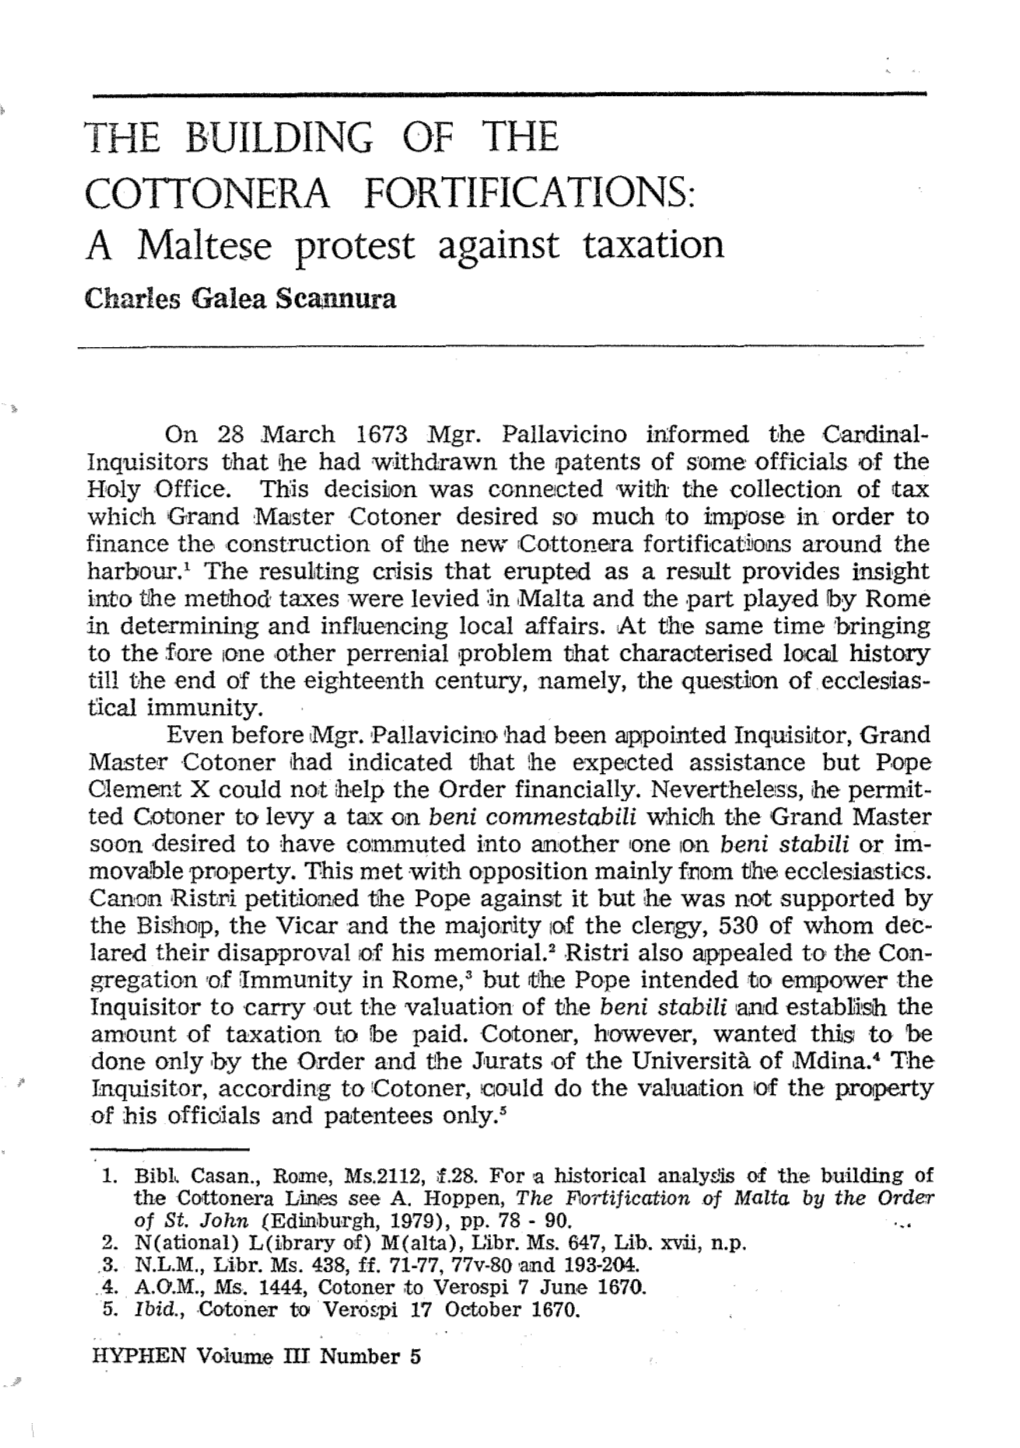 THE BUILDING of the COTTONERA FORTIFICATIONS: a Maltese Protest Against Taxation Charles Galea Scannura